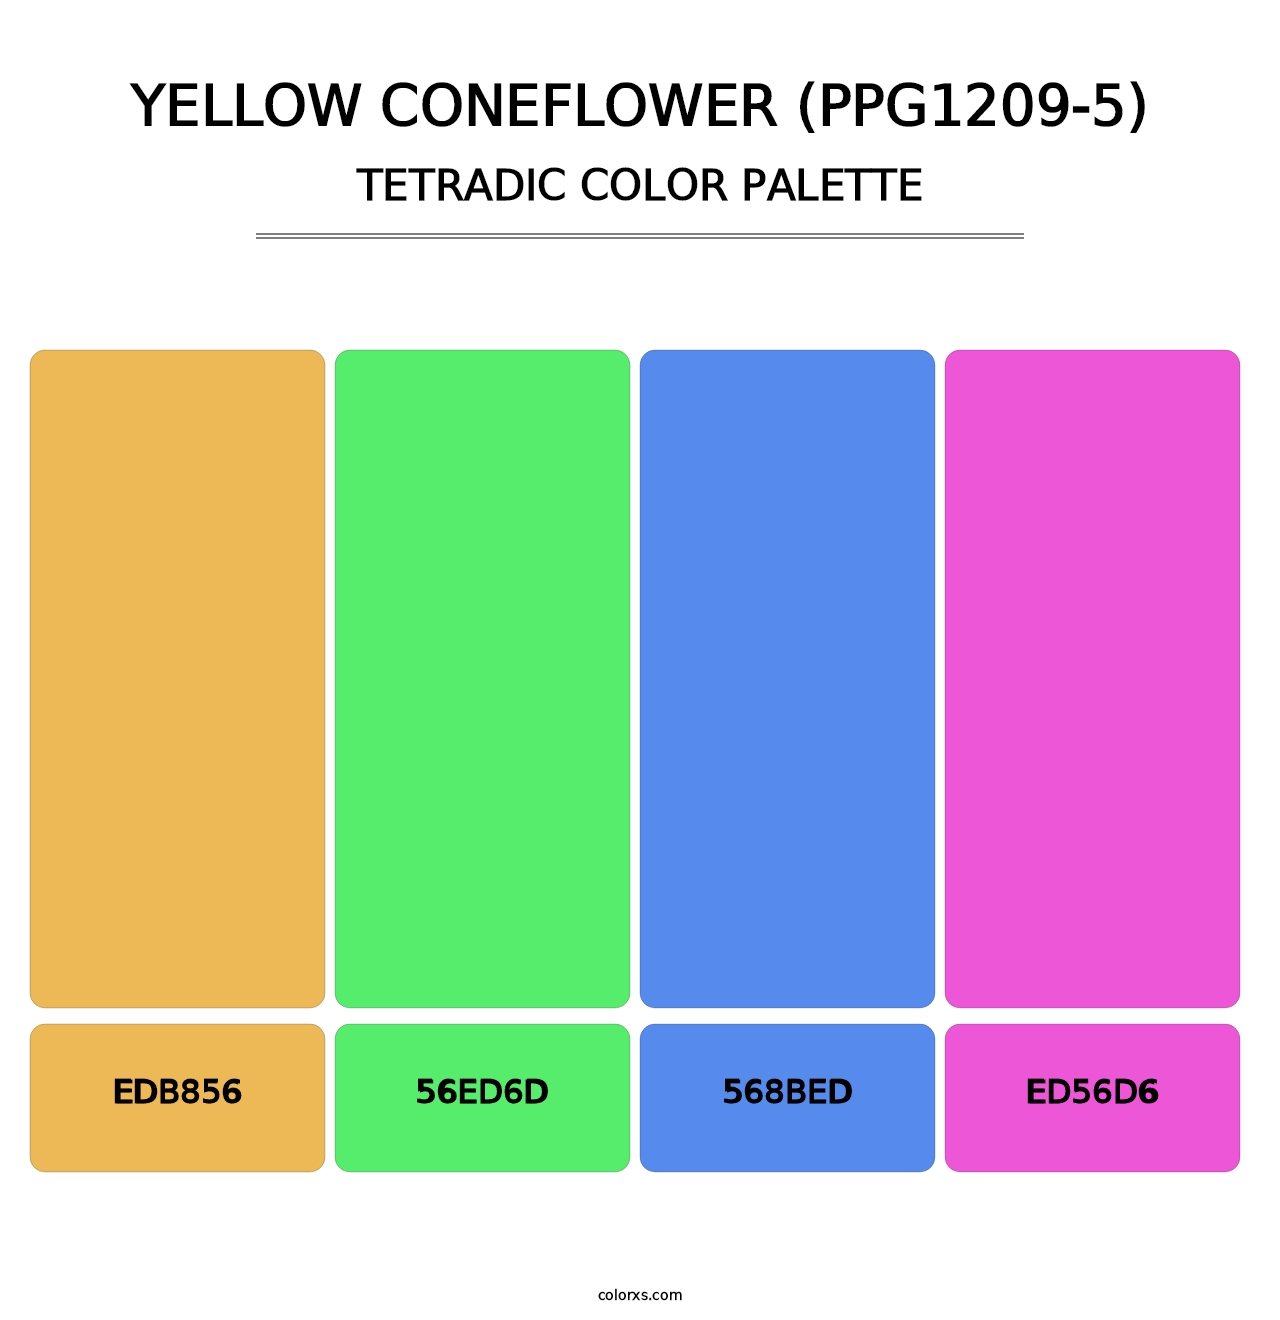 Yellow Coneflower (PPG1209-5) - Tetradic Color Palette